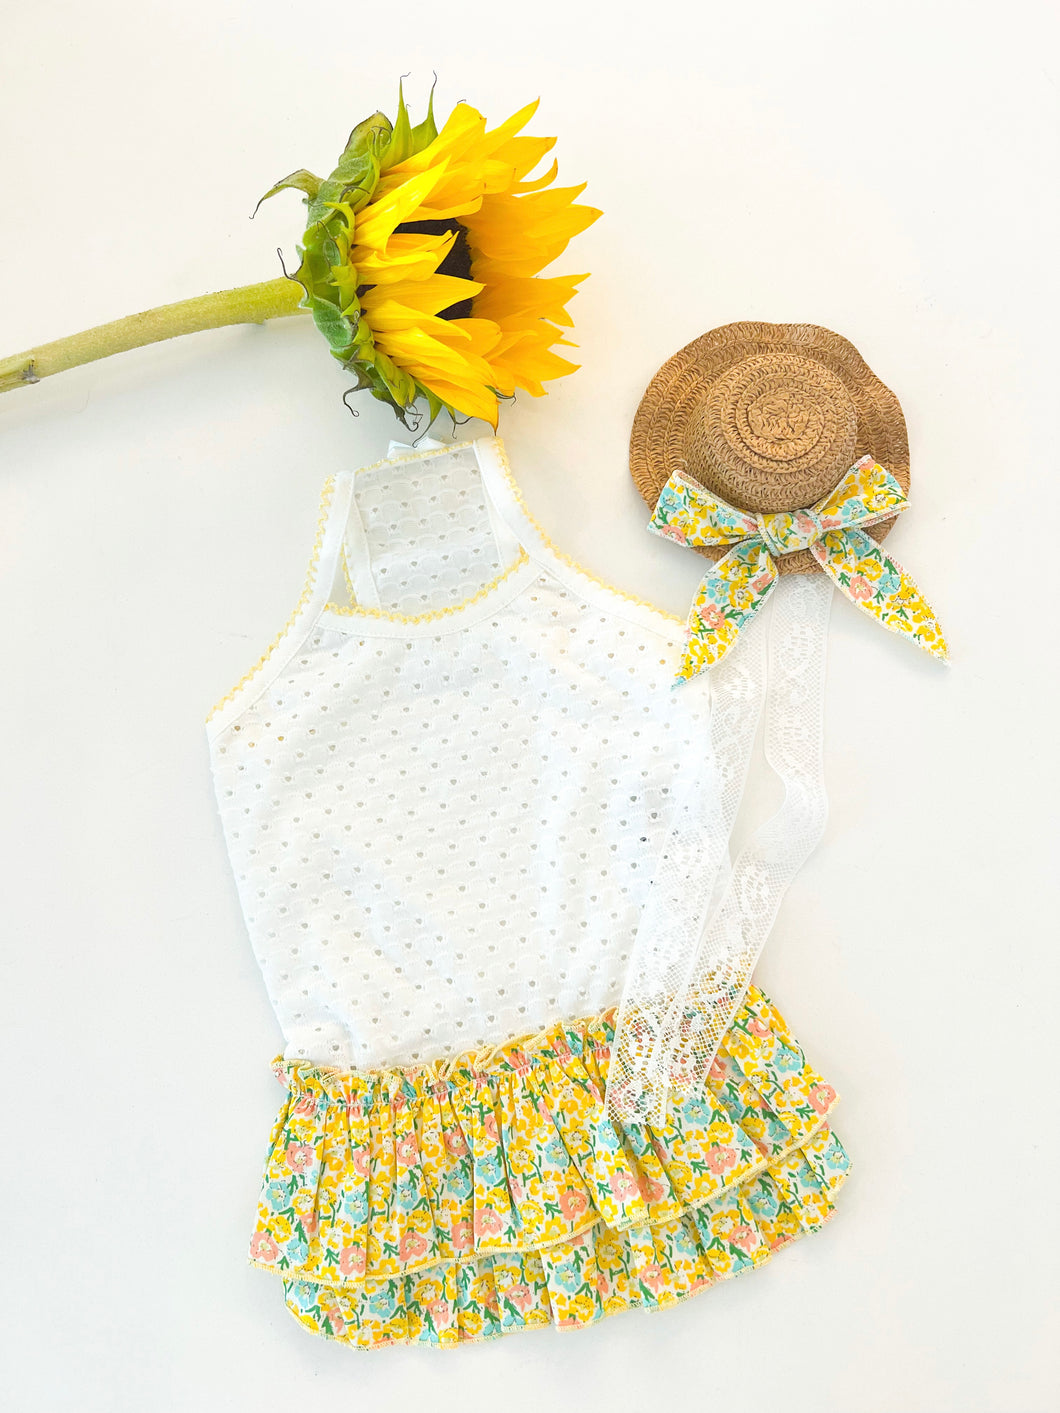 EYELET TANK FORAL RUFFLED YELLOW SKIRT DRESS WITH HAT